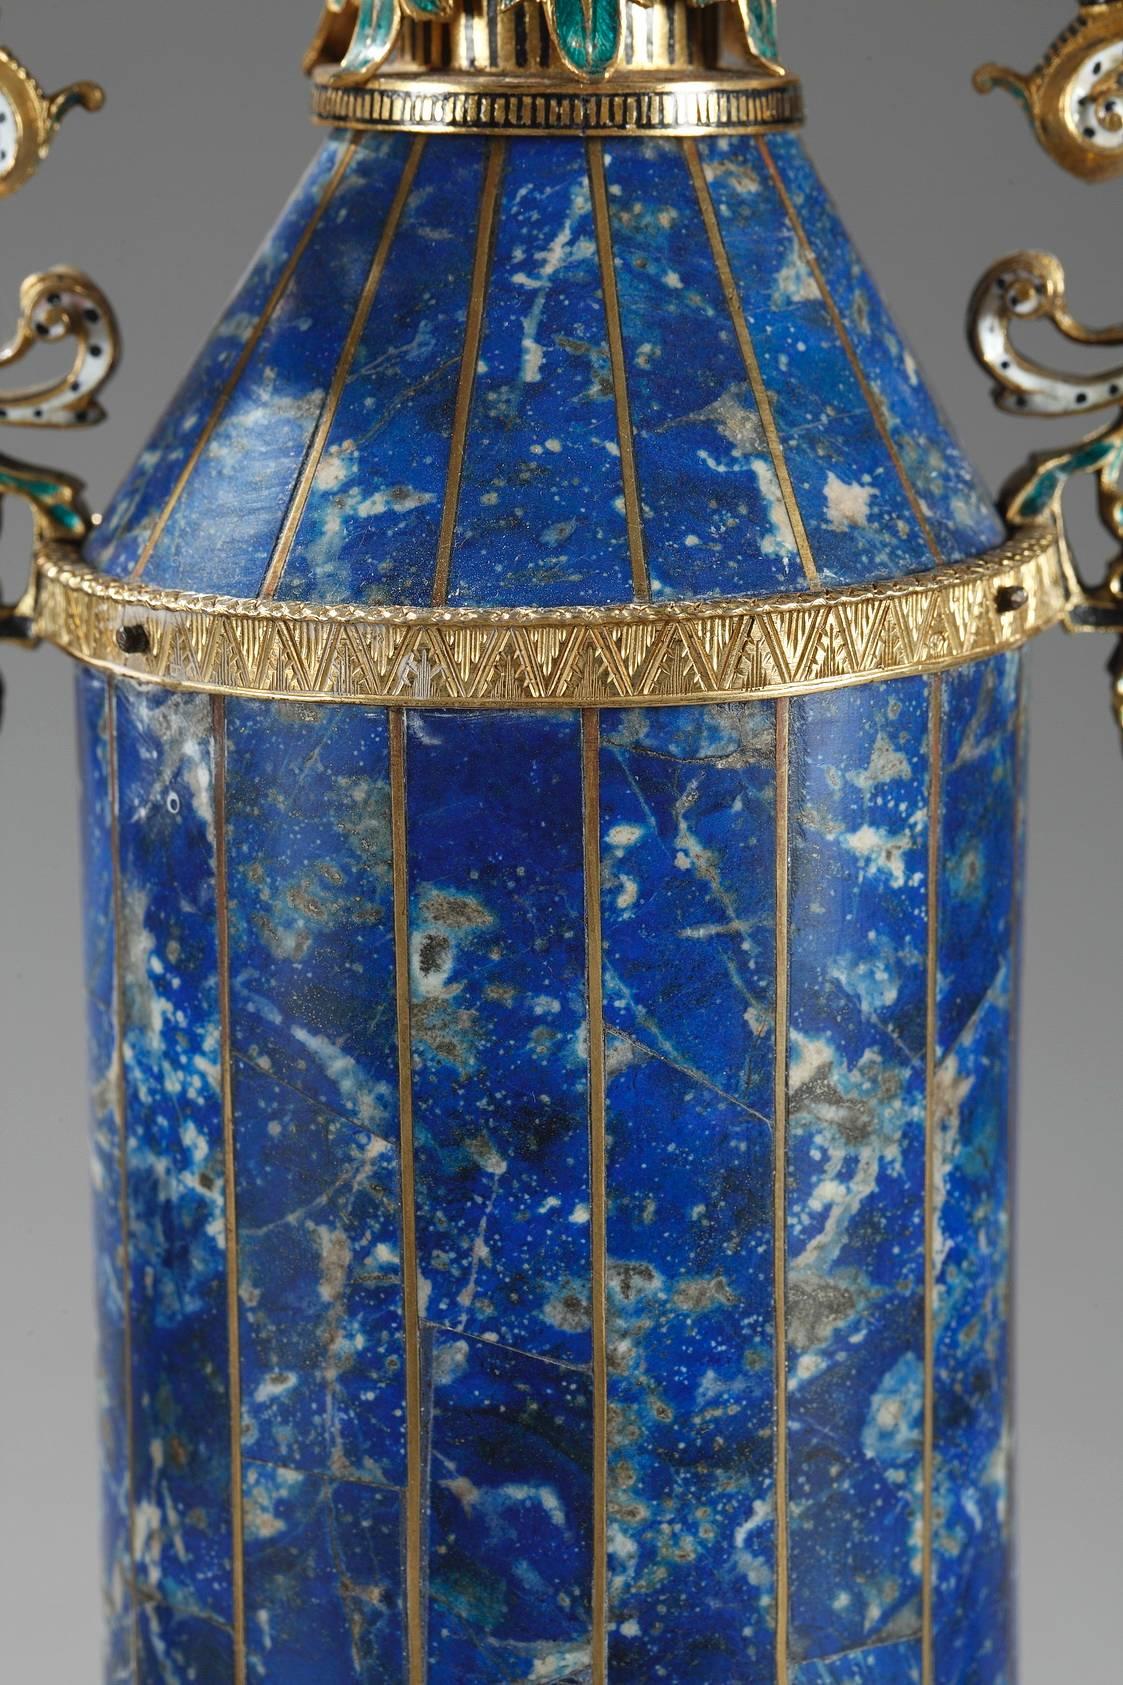 Gilt Clock with Vases in Lapis Lazuli and Silver, Vienna, 19th Century